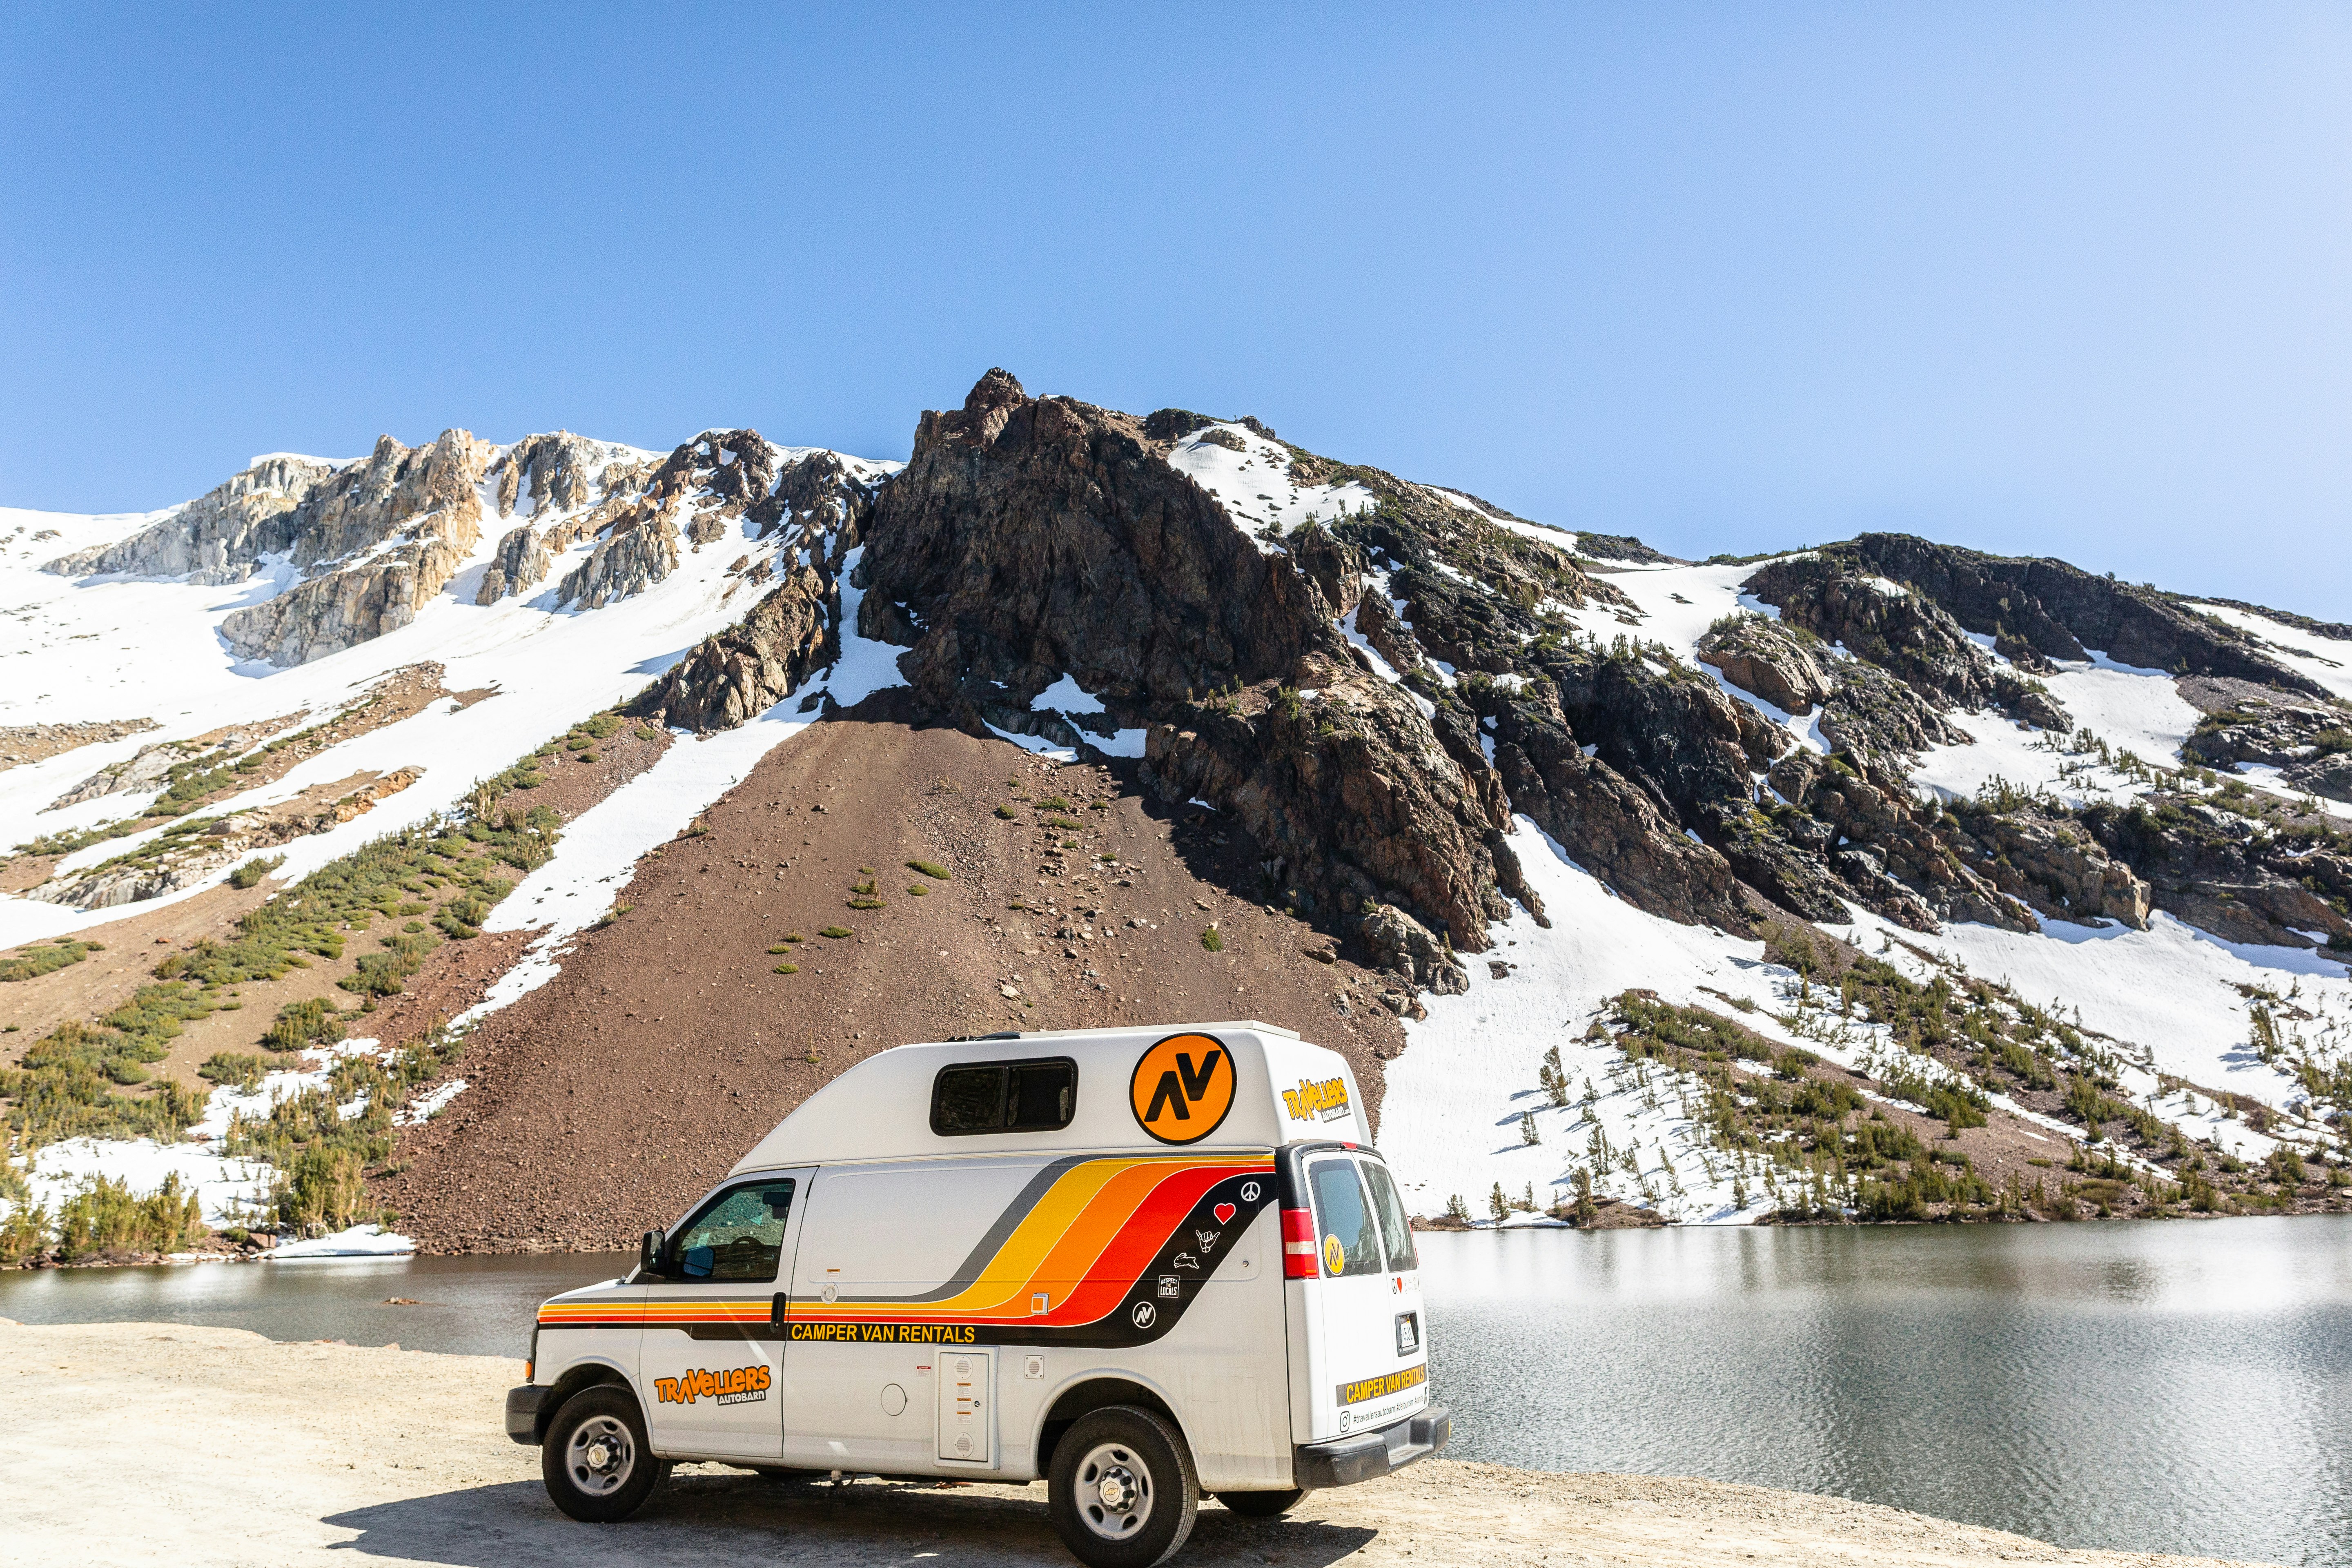 A campervan parked in front of a mountain lake and snow capped rocks